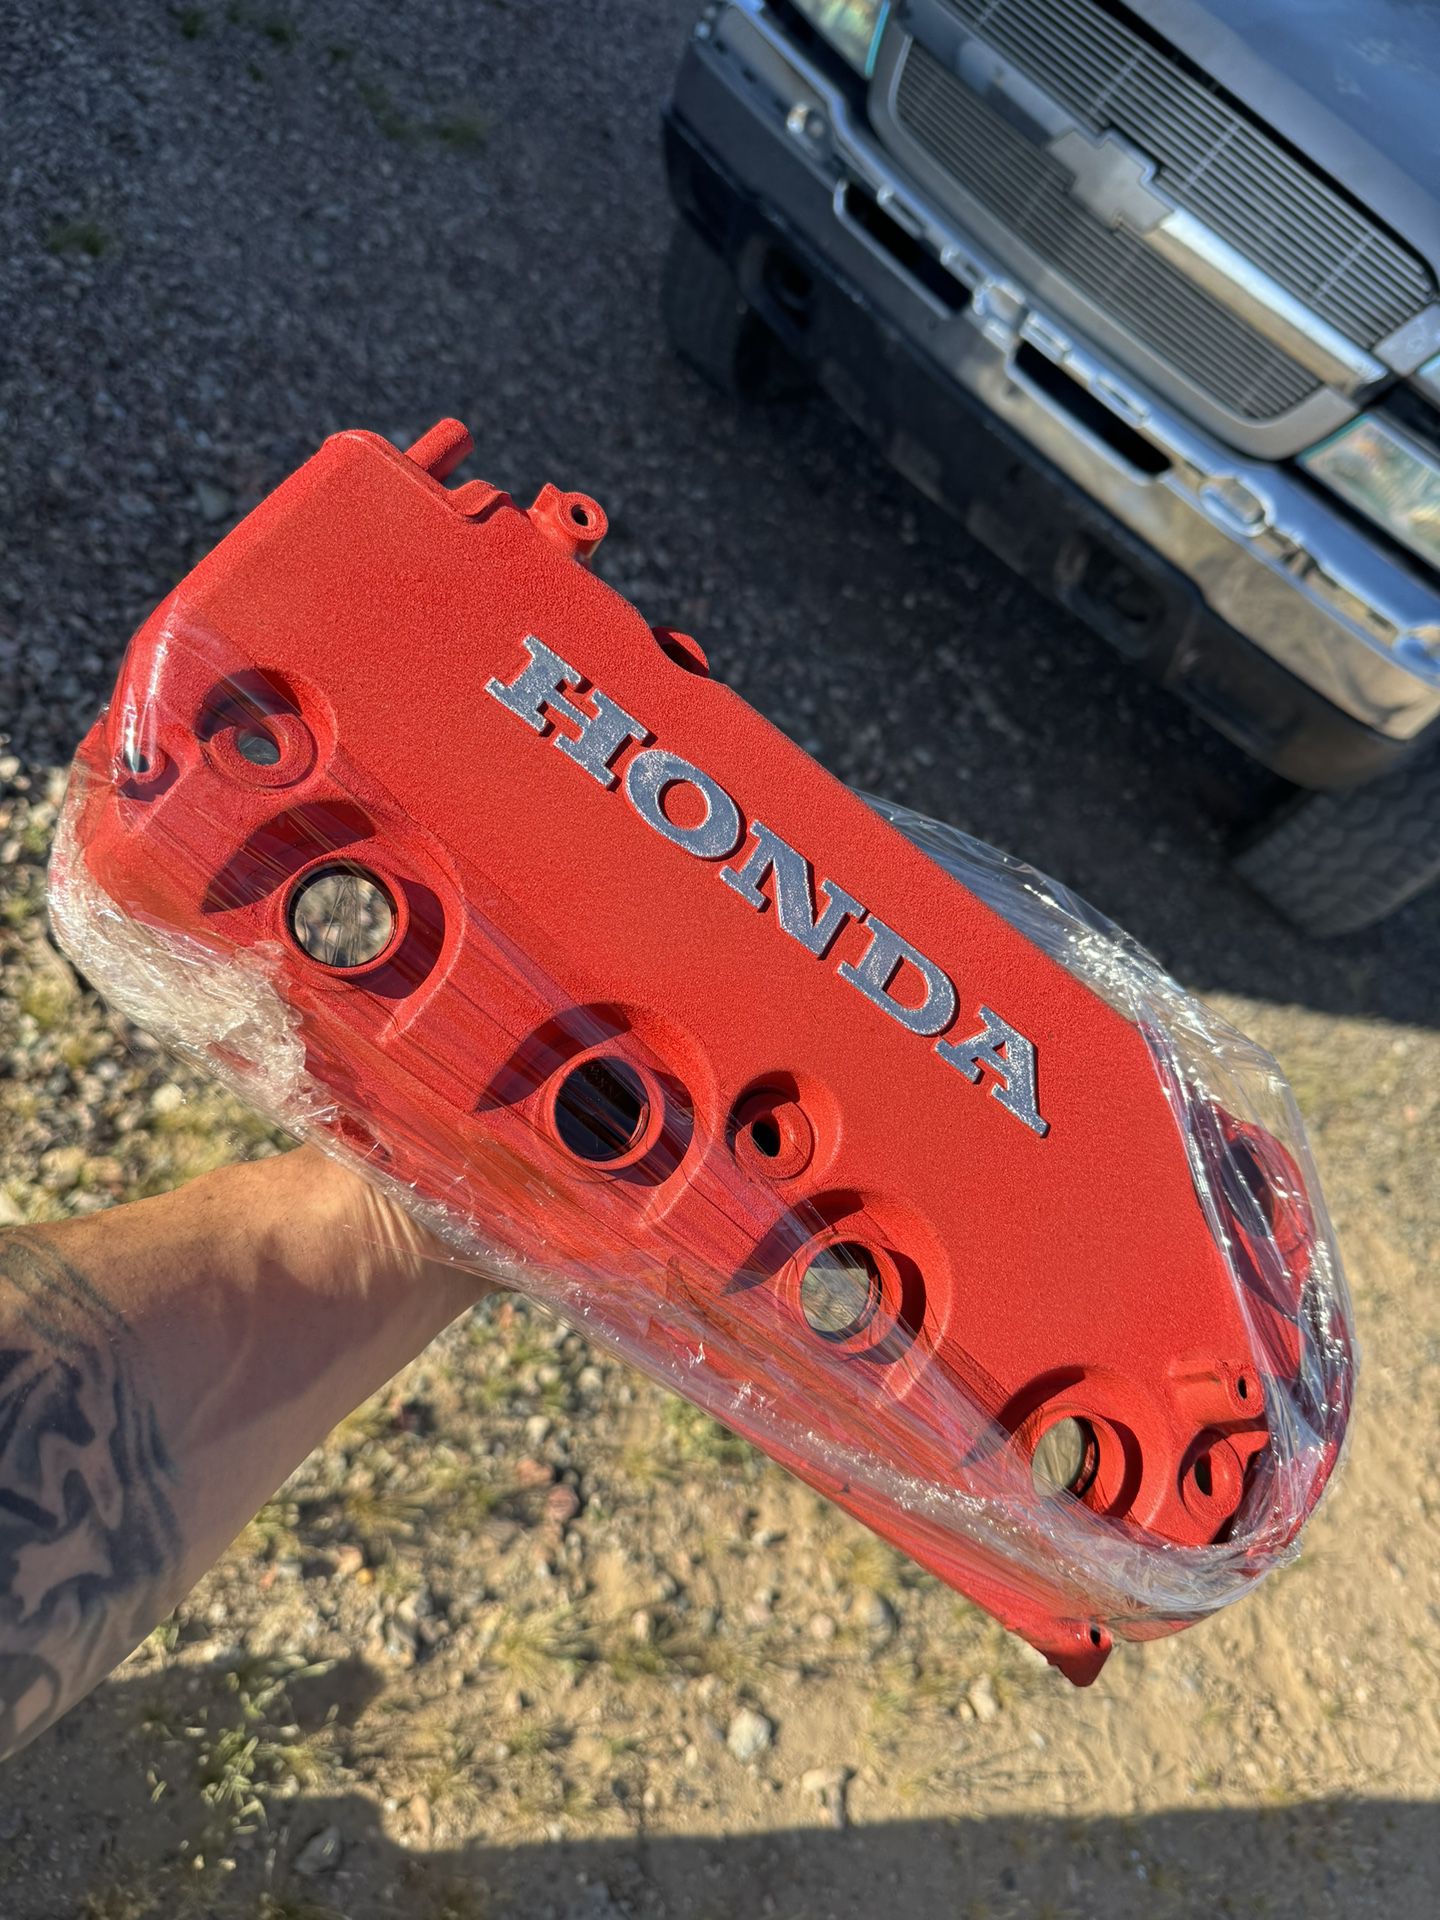 Type R Red Wrinkle Valve Cover D16y8